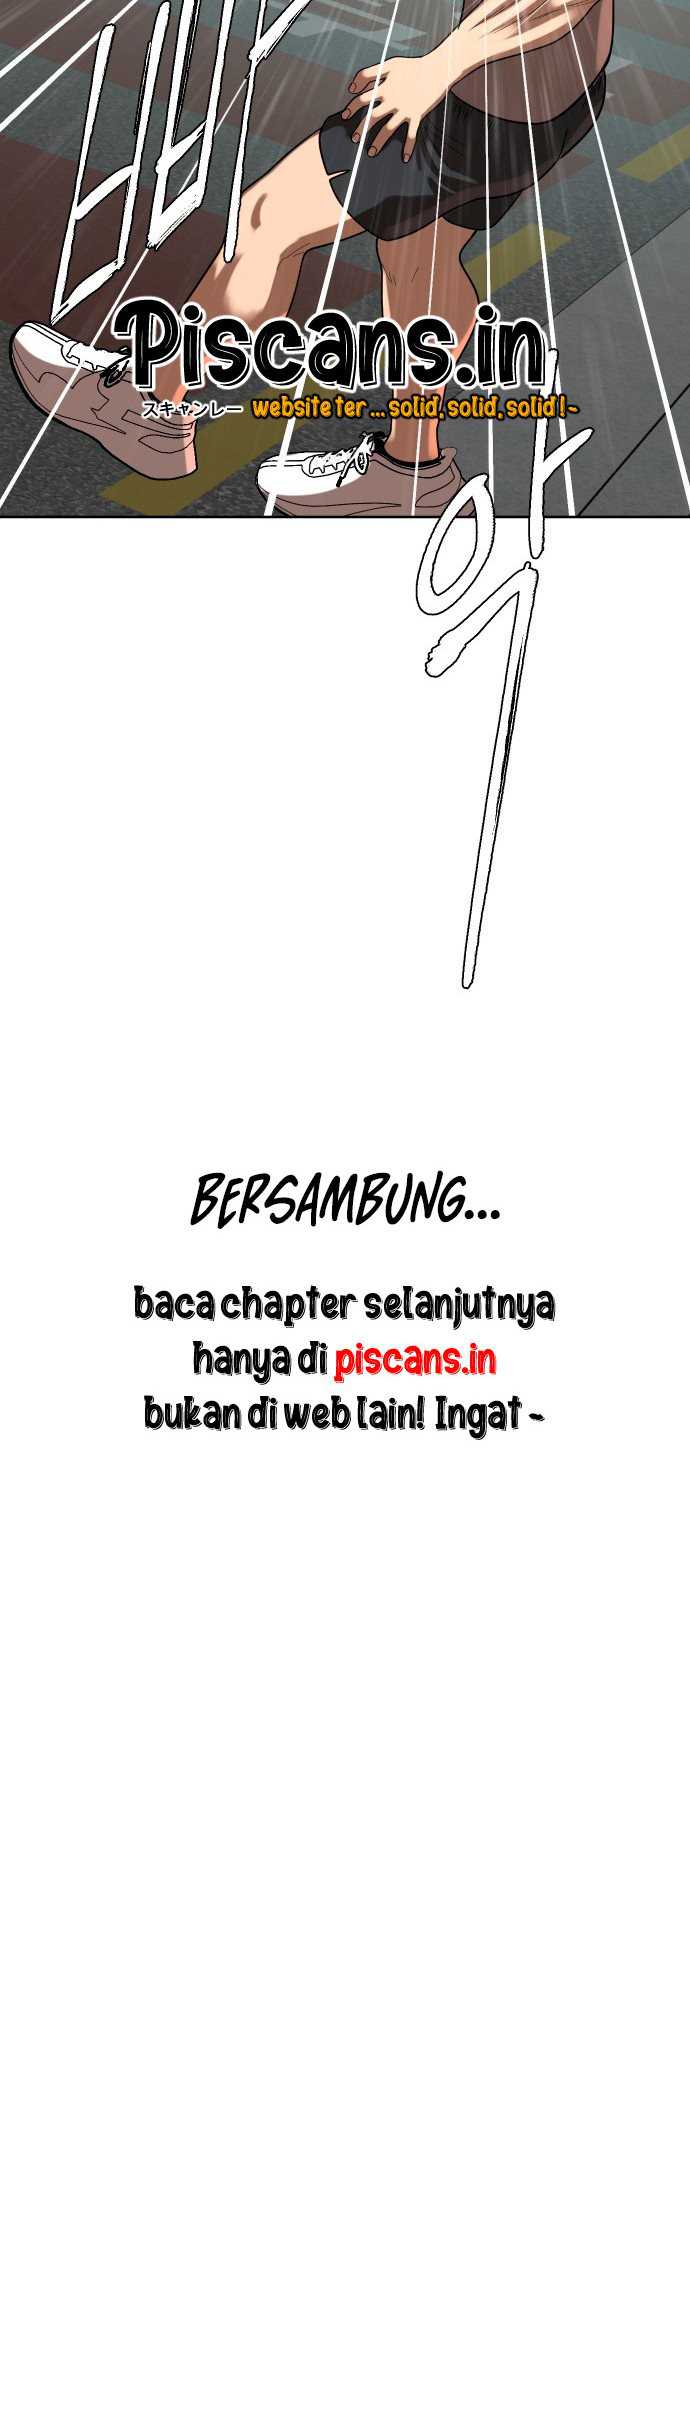 Top 1% Chapter 06